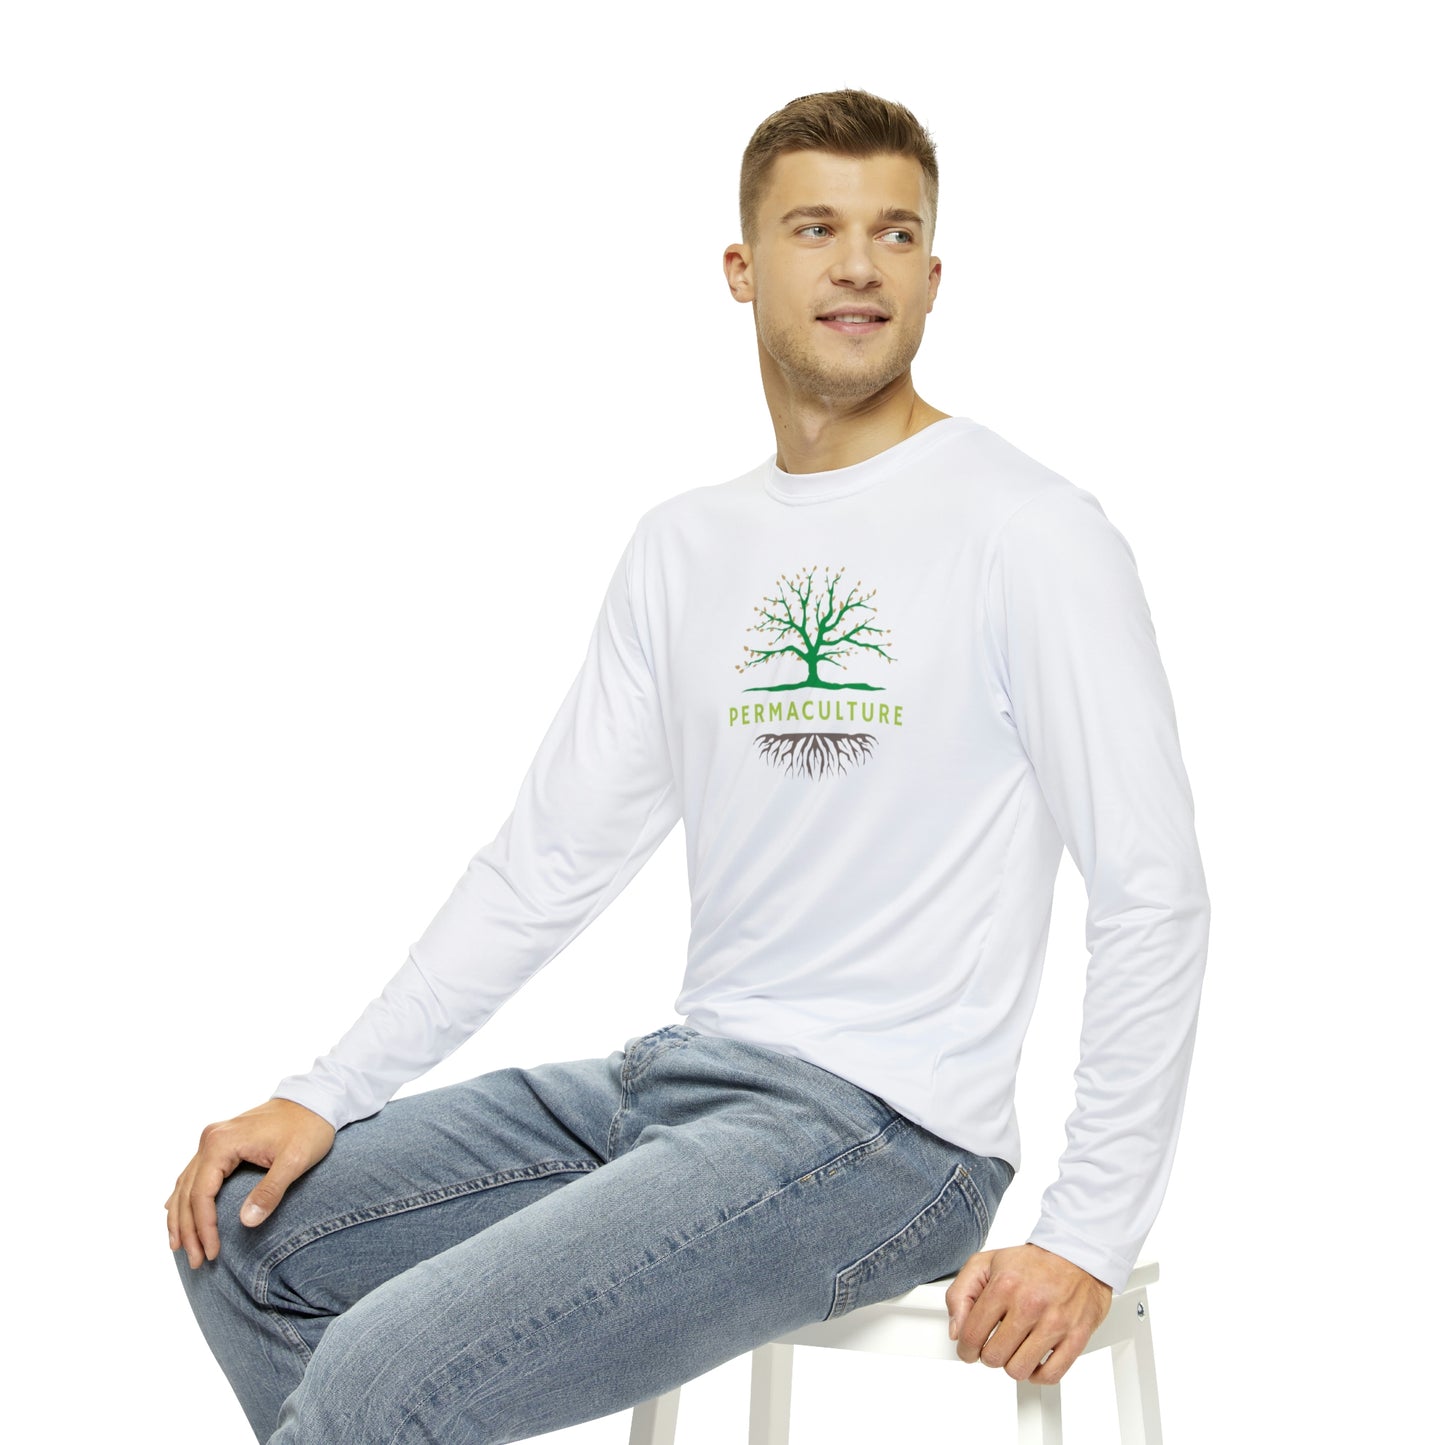 Permaculture - Men's Long Sleeve Shirt